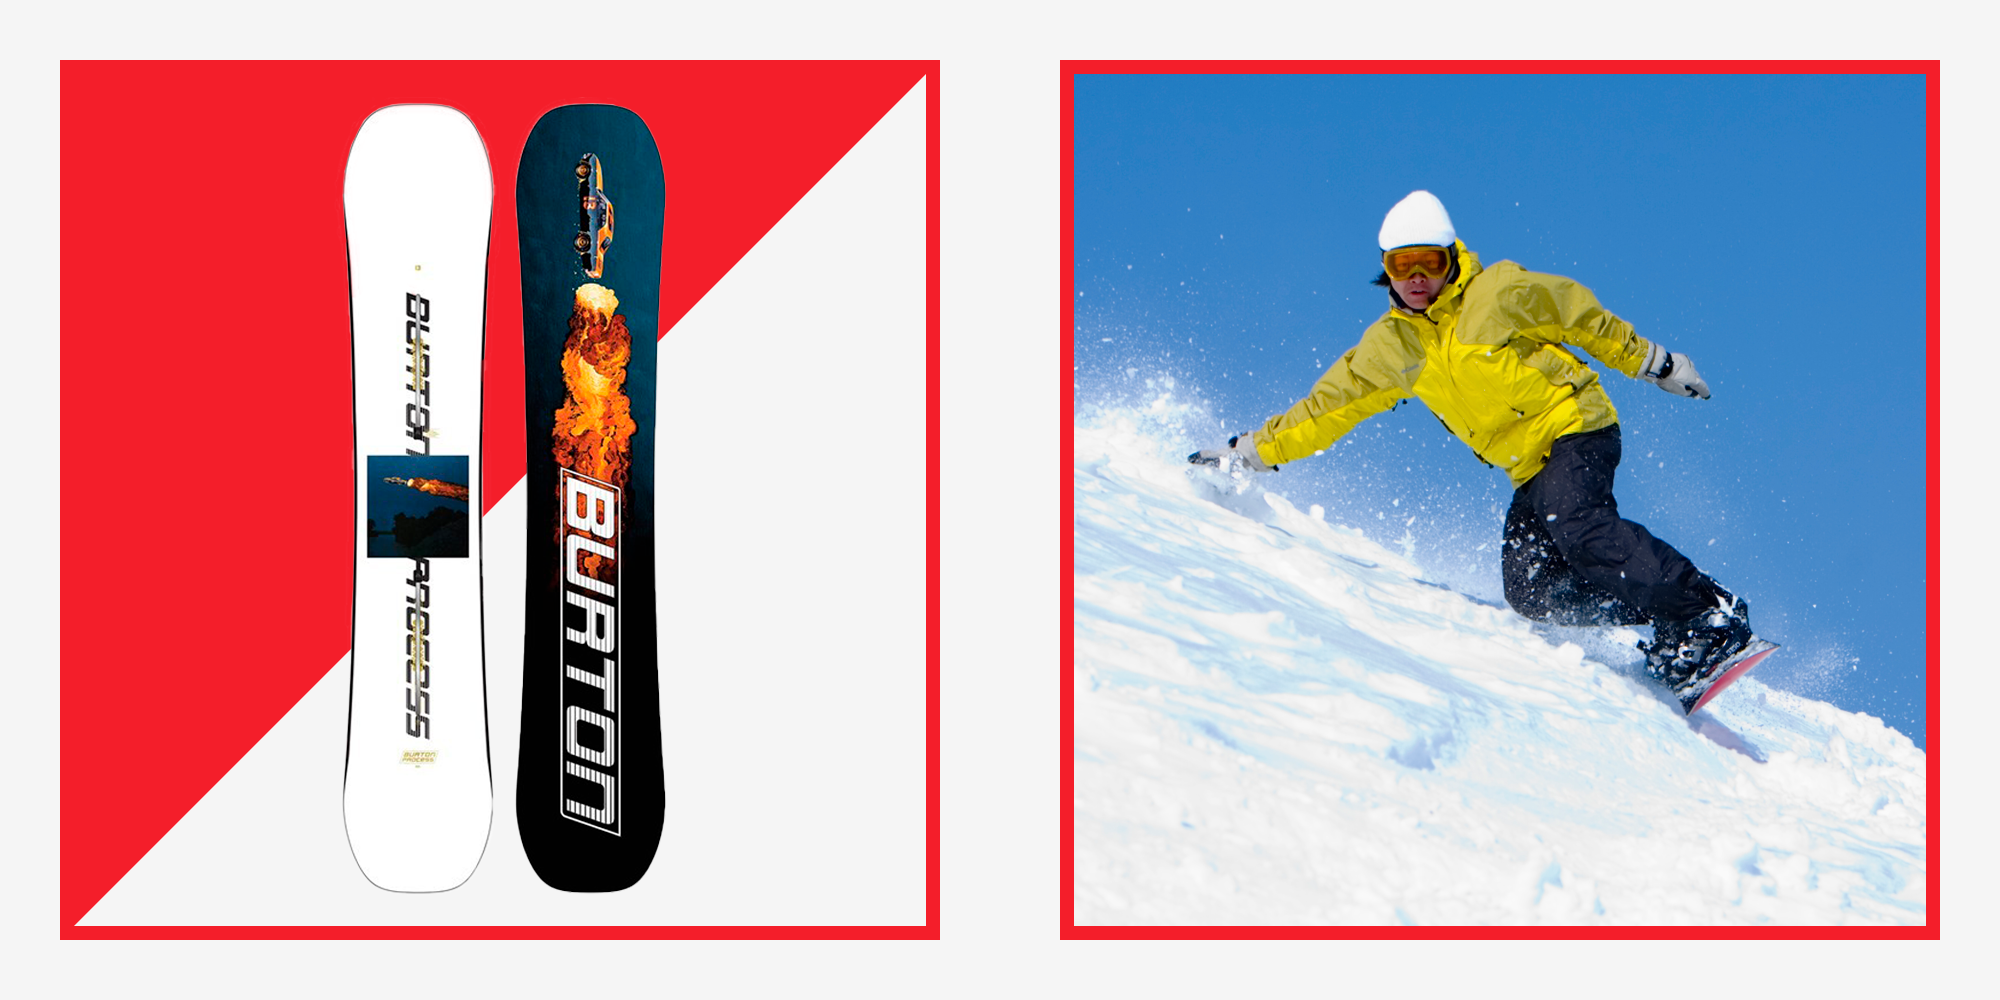 Marvel thermometer Encourage The 14 Best Snowboard Brands and Gear for Men